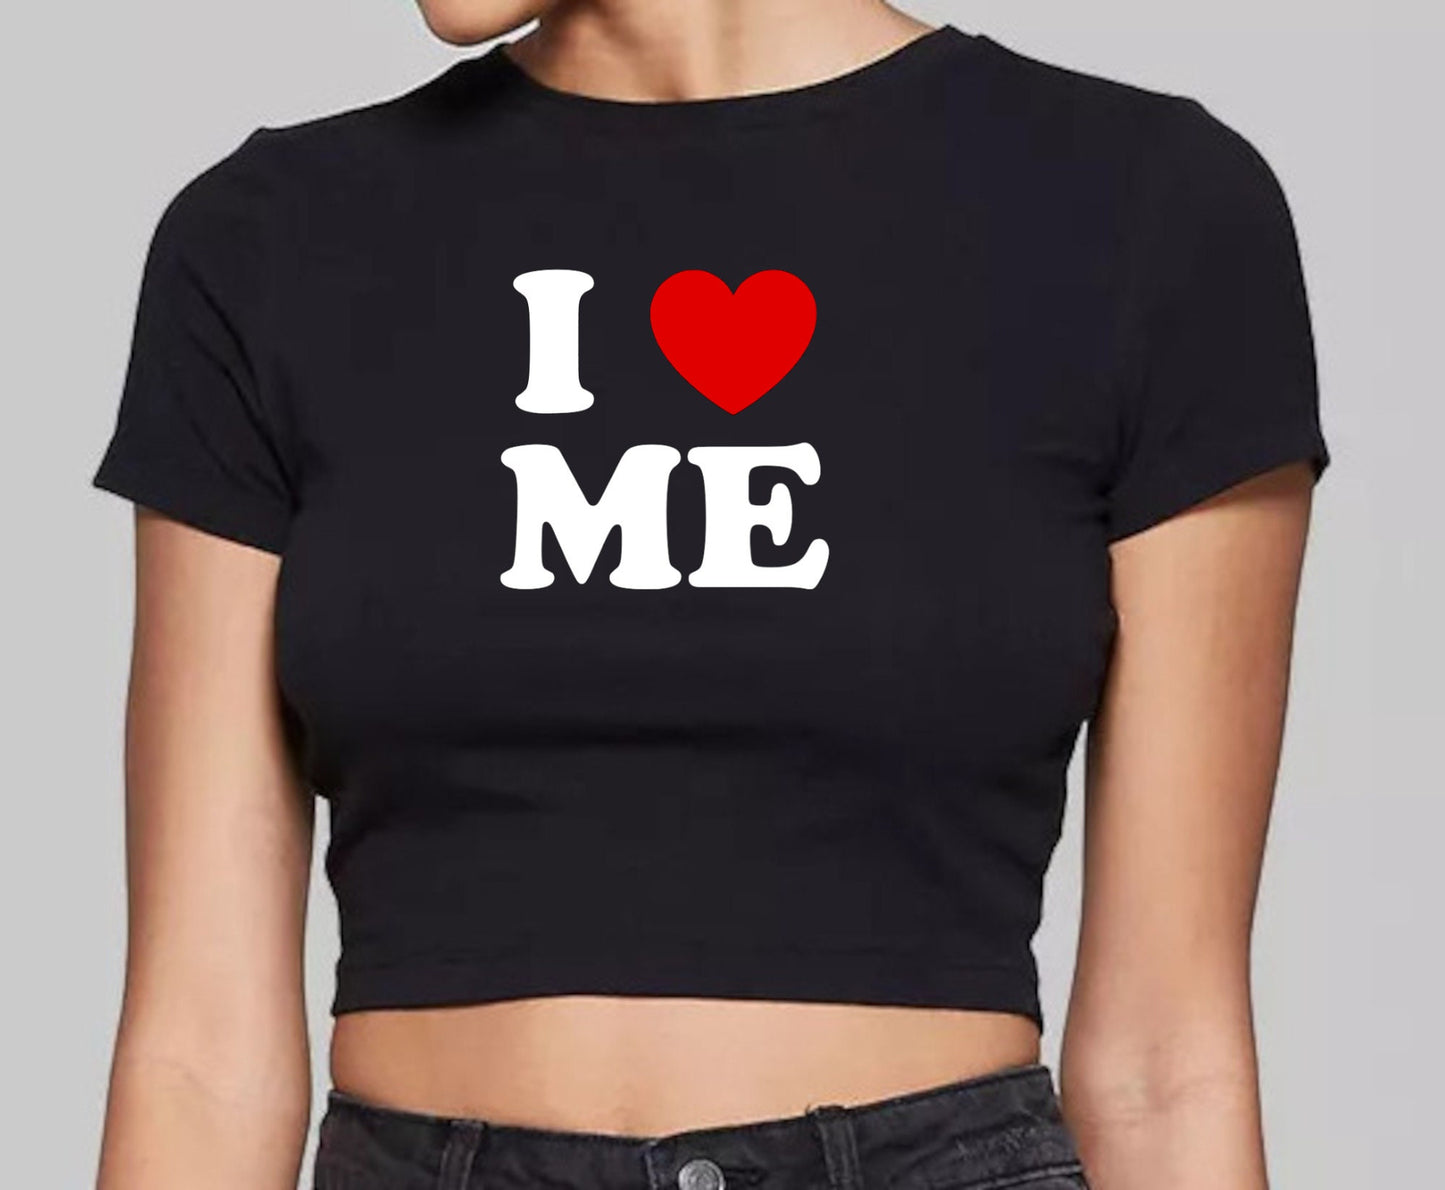 I Heart Me Fitted Short Sleeve Crop Top